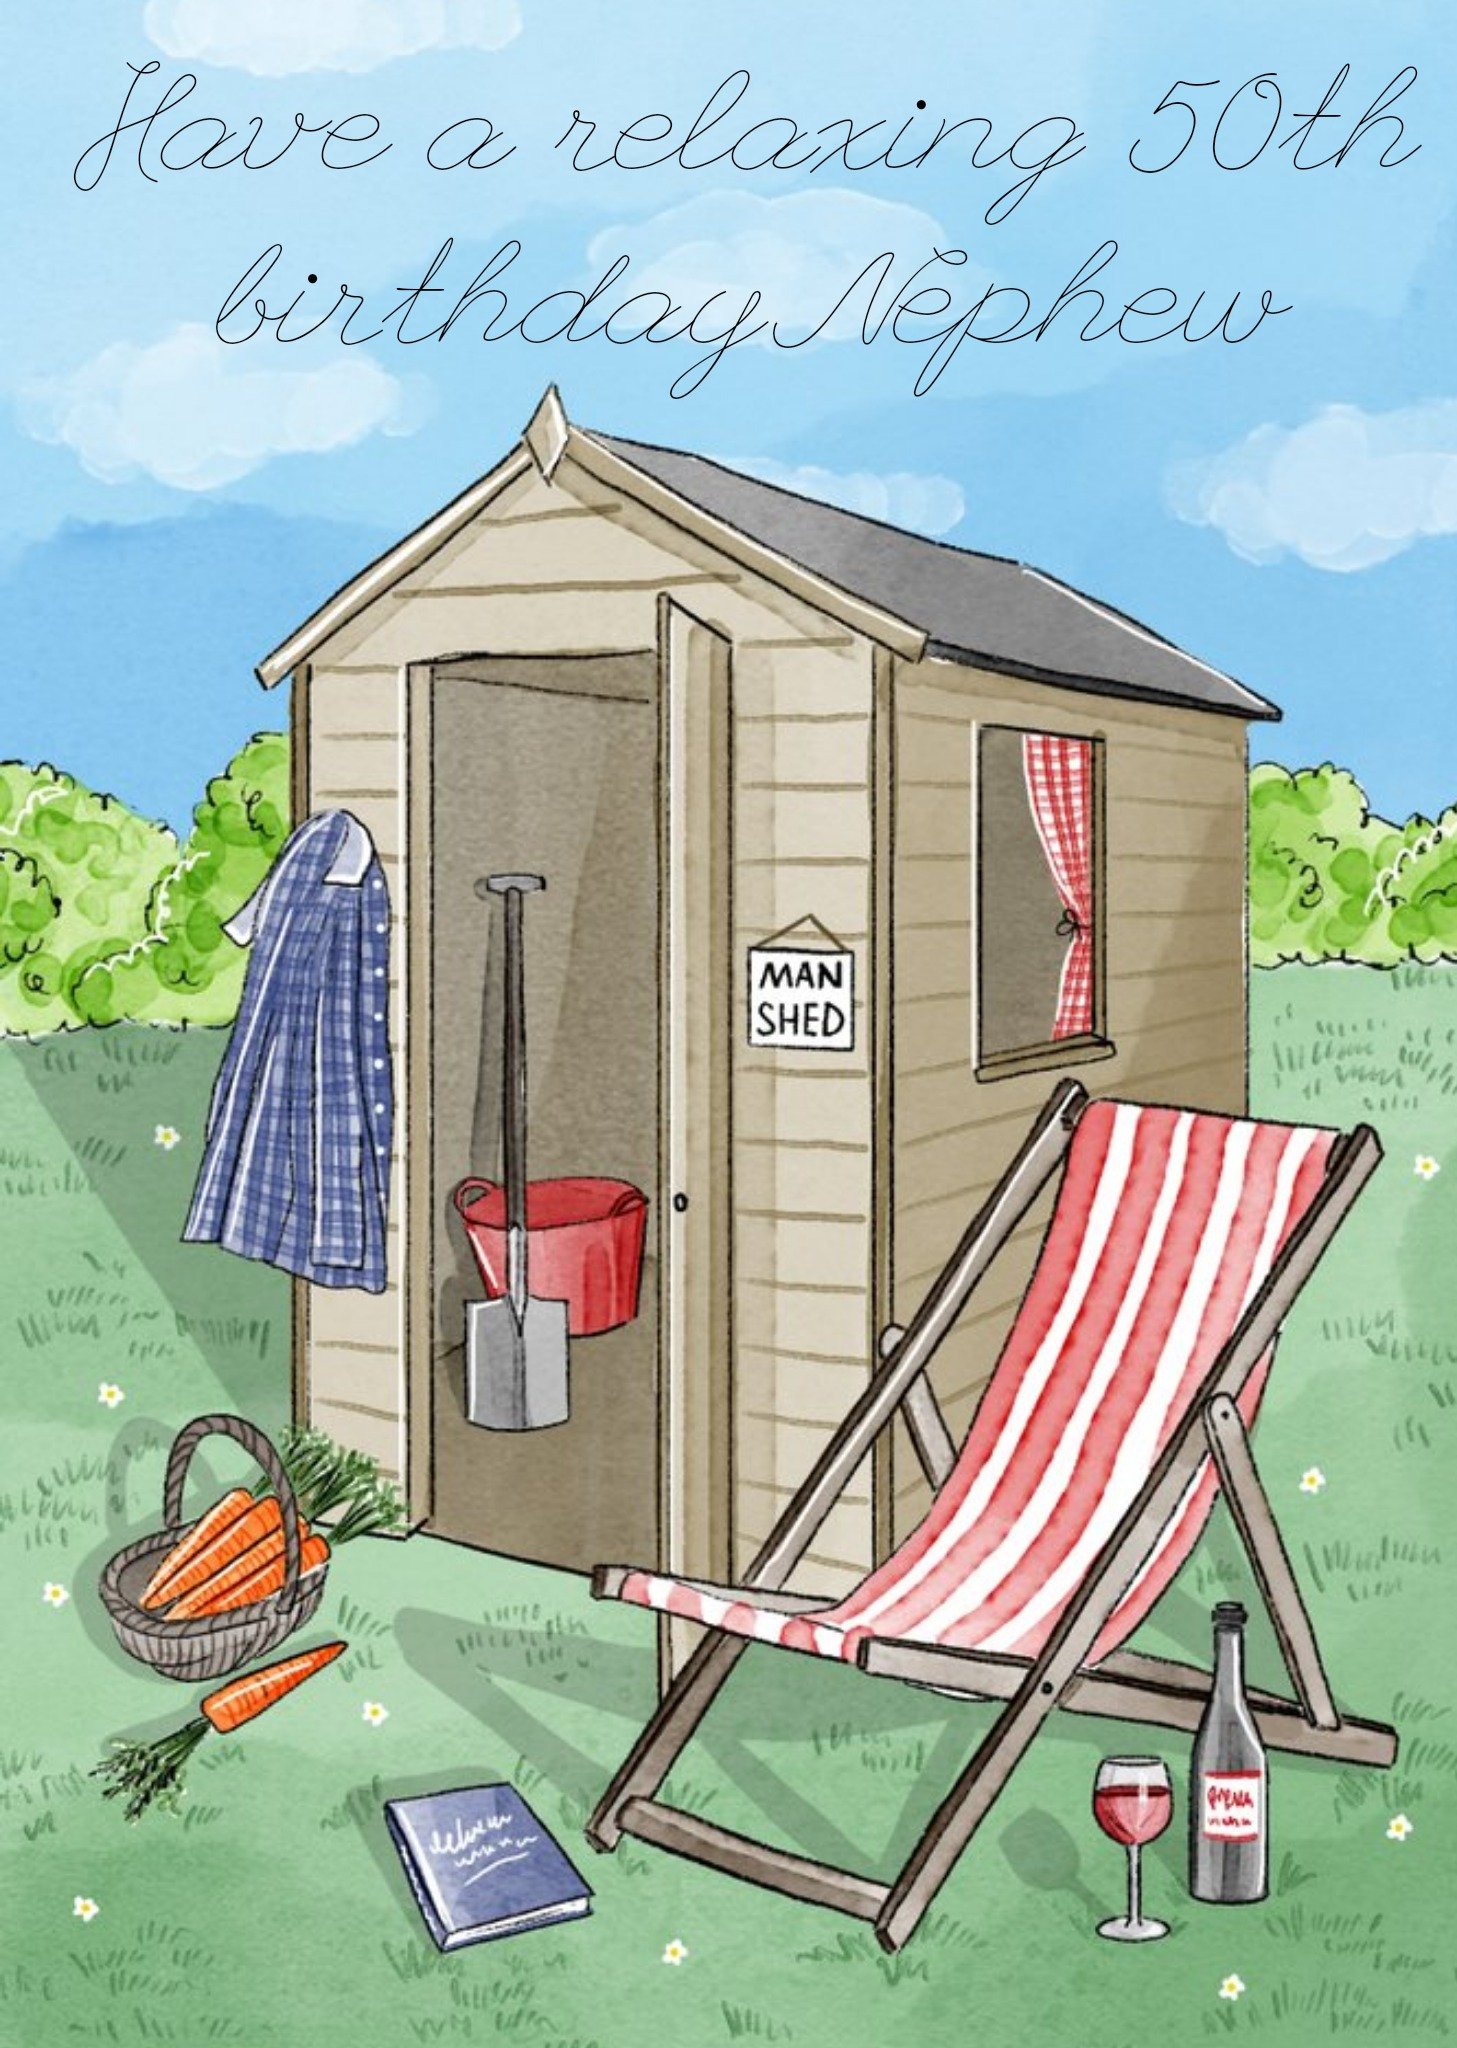 Moonpig Illustrated Garden Shed 50th Birthday Card For Your Nephew By Okey Dokey Design, Large